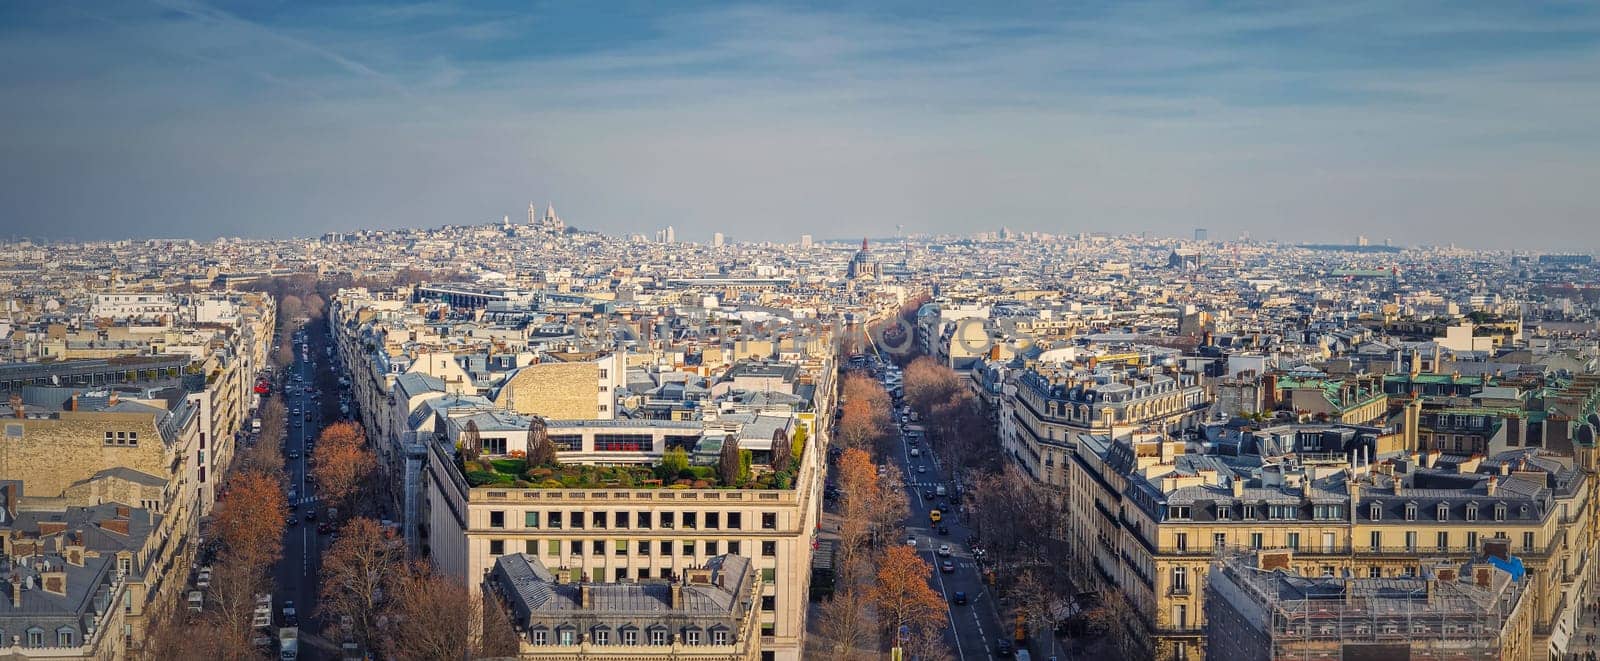 Aerial Paris cityscape panorama with view to Sacre Coeur Basilica of the Sacred Heart, France. Beautiful parisian architecture, historic buildings and landmarks on the horizon by psychoshadow